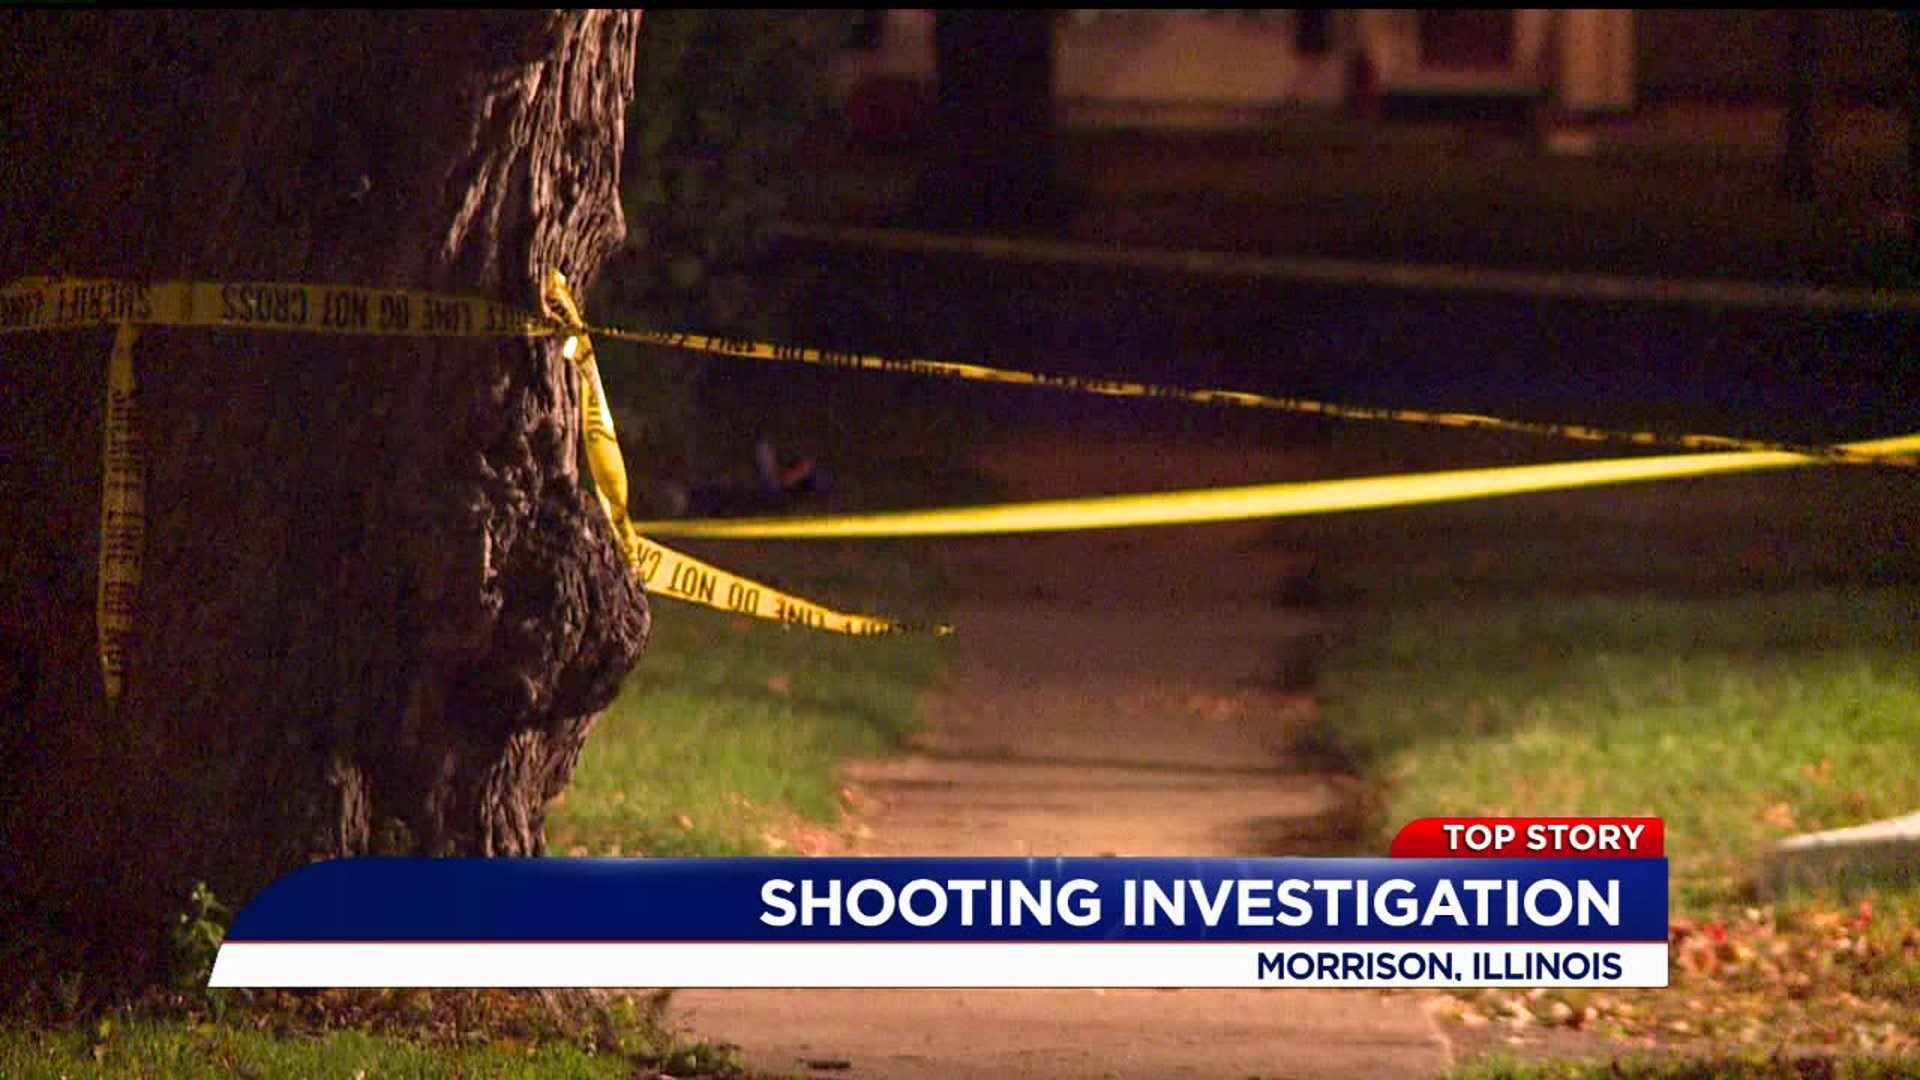 New information released on Morrison shooting